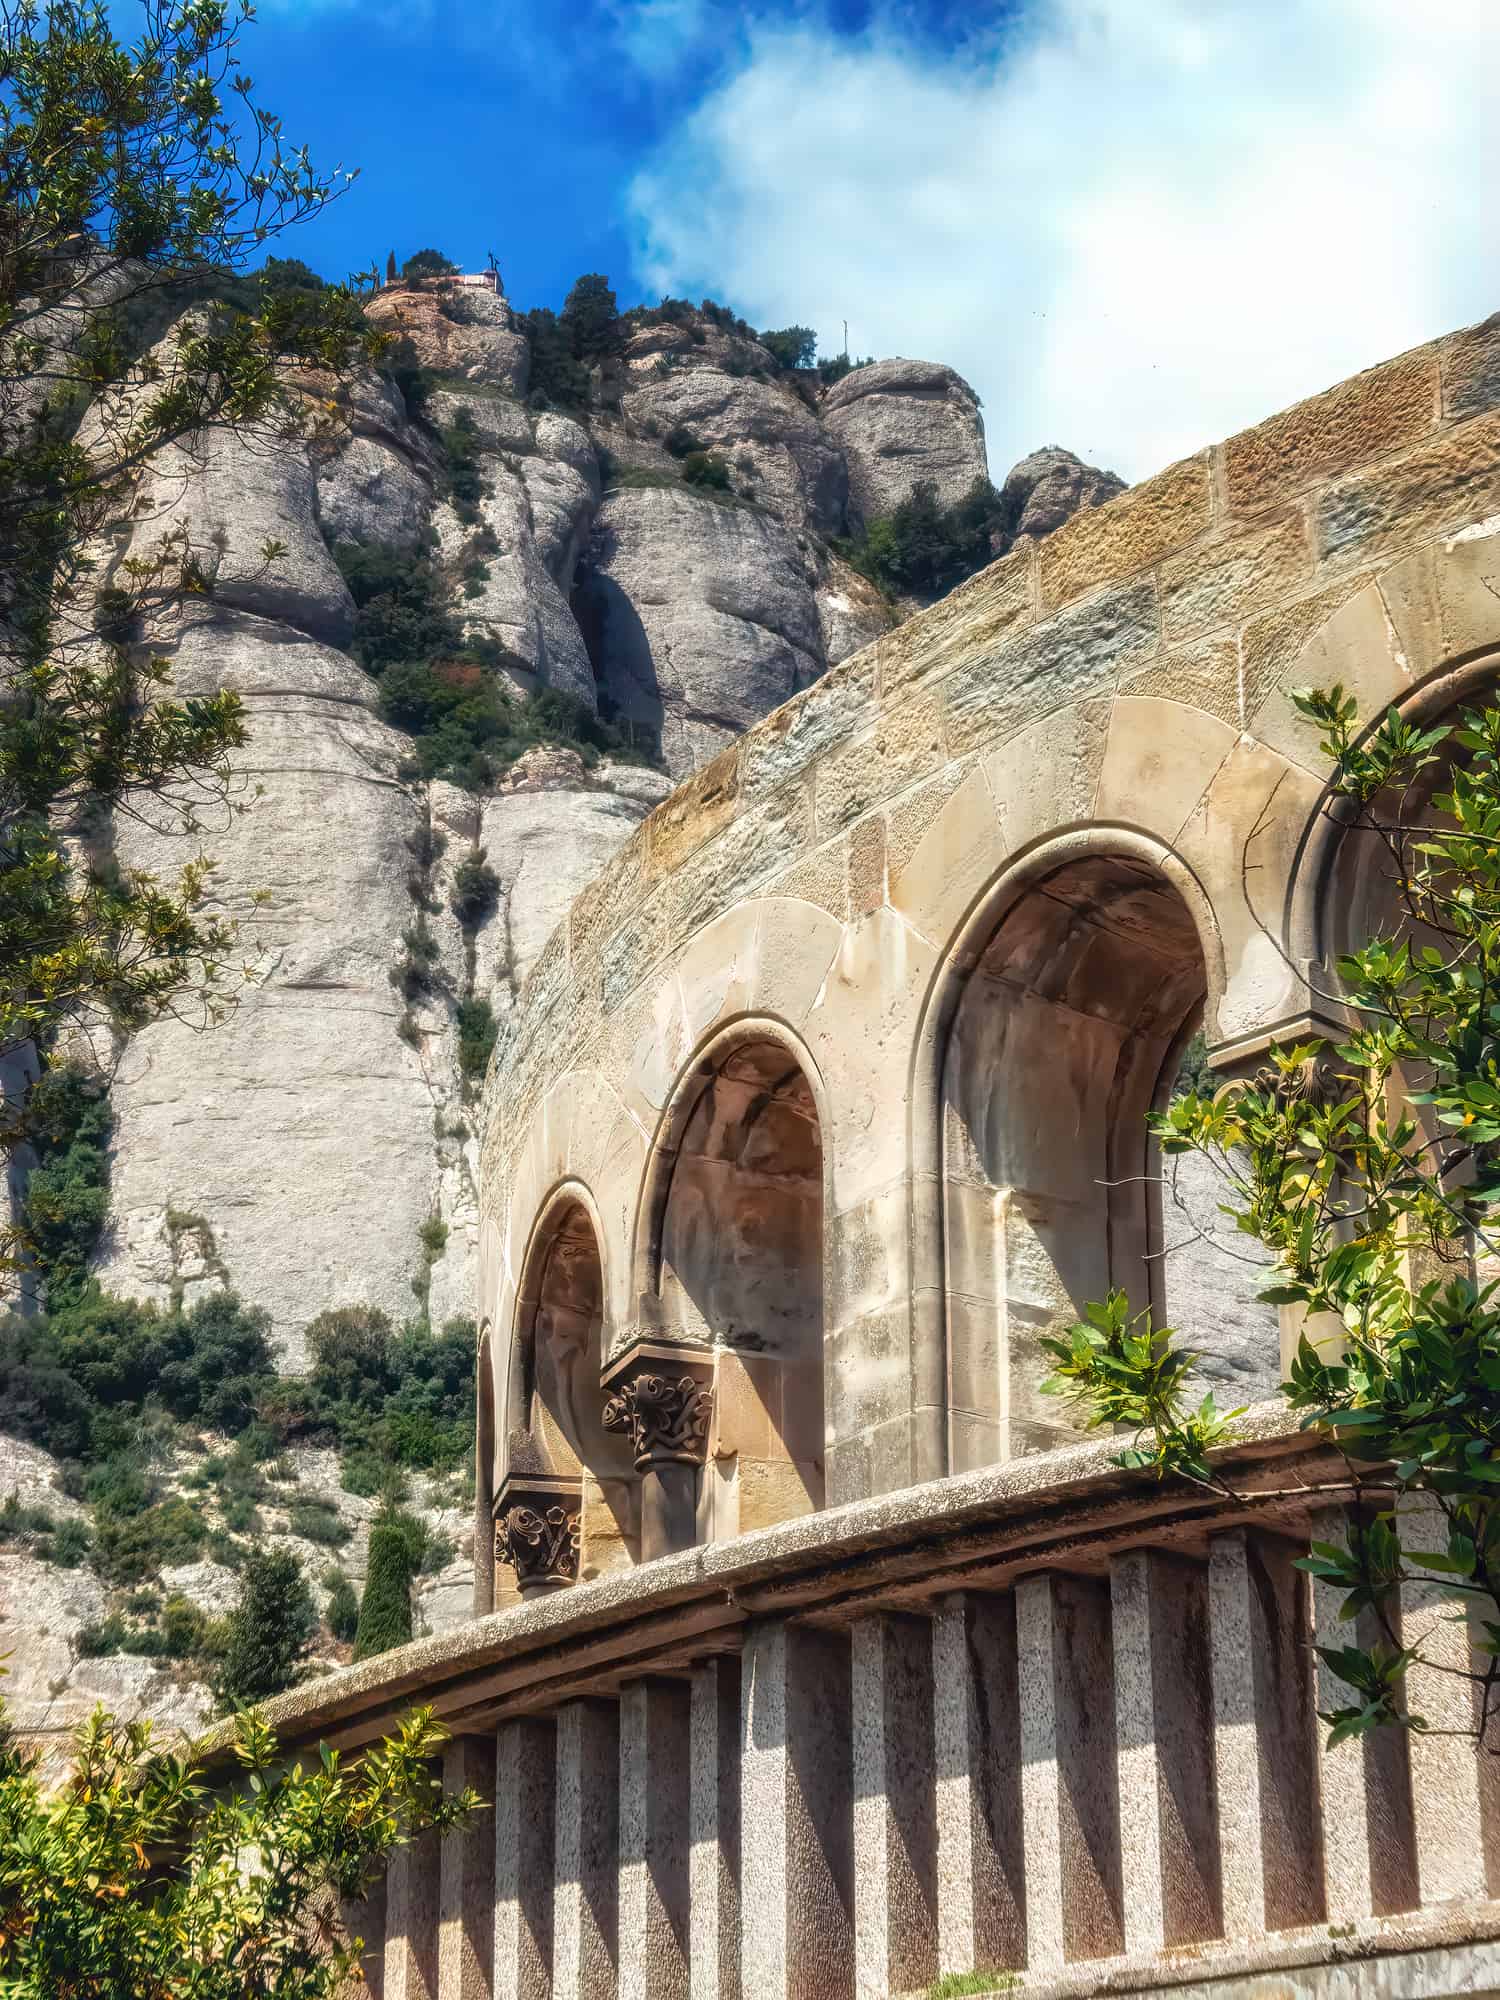 Ancient arches at Montserrat monastery in Spain